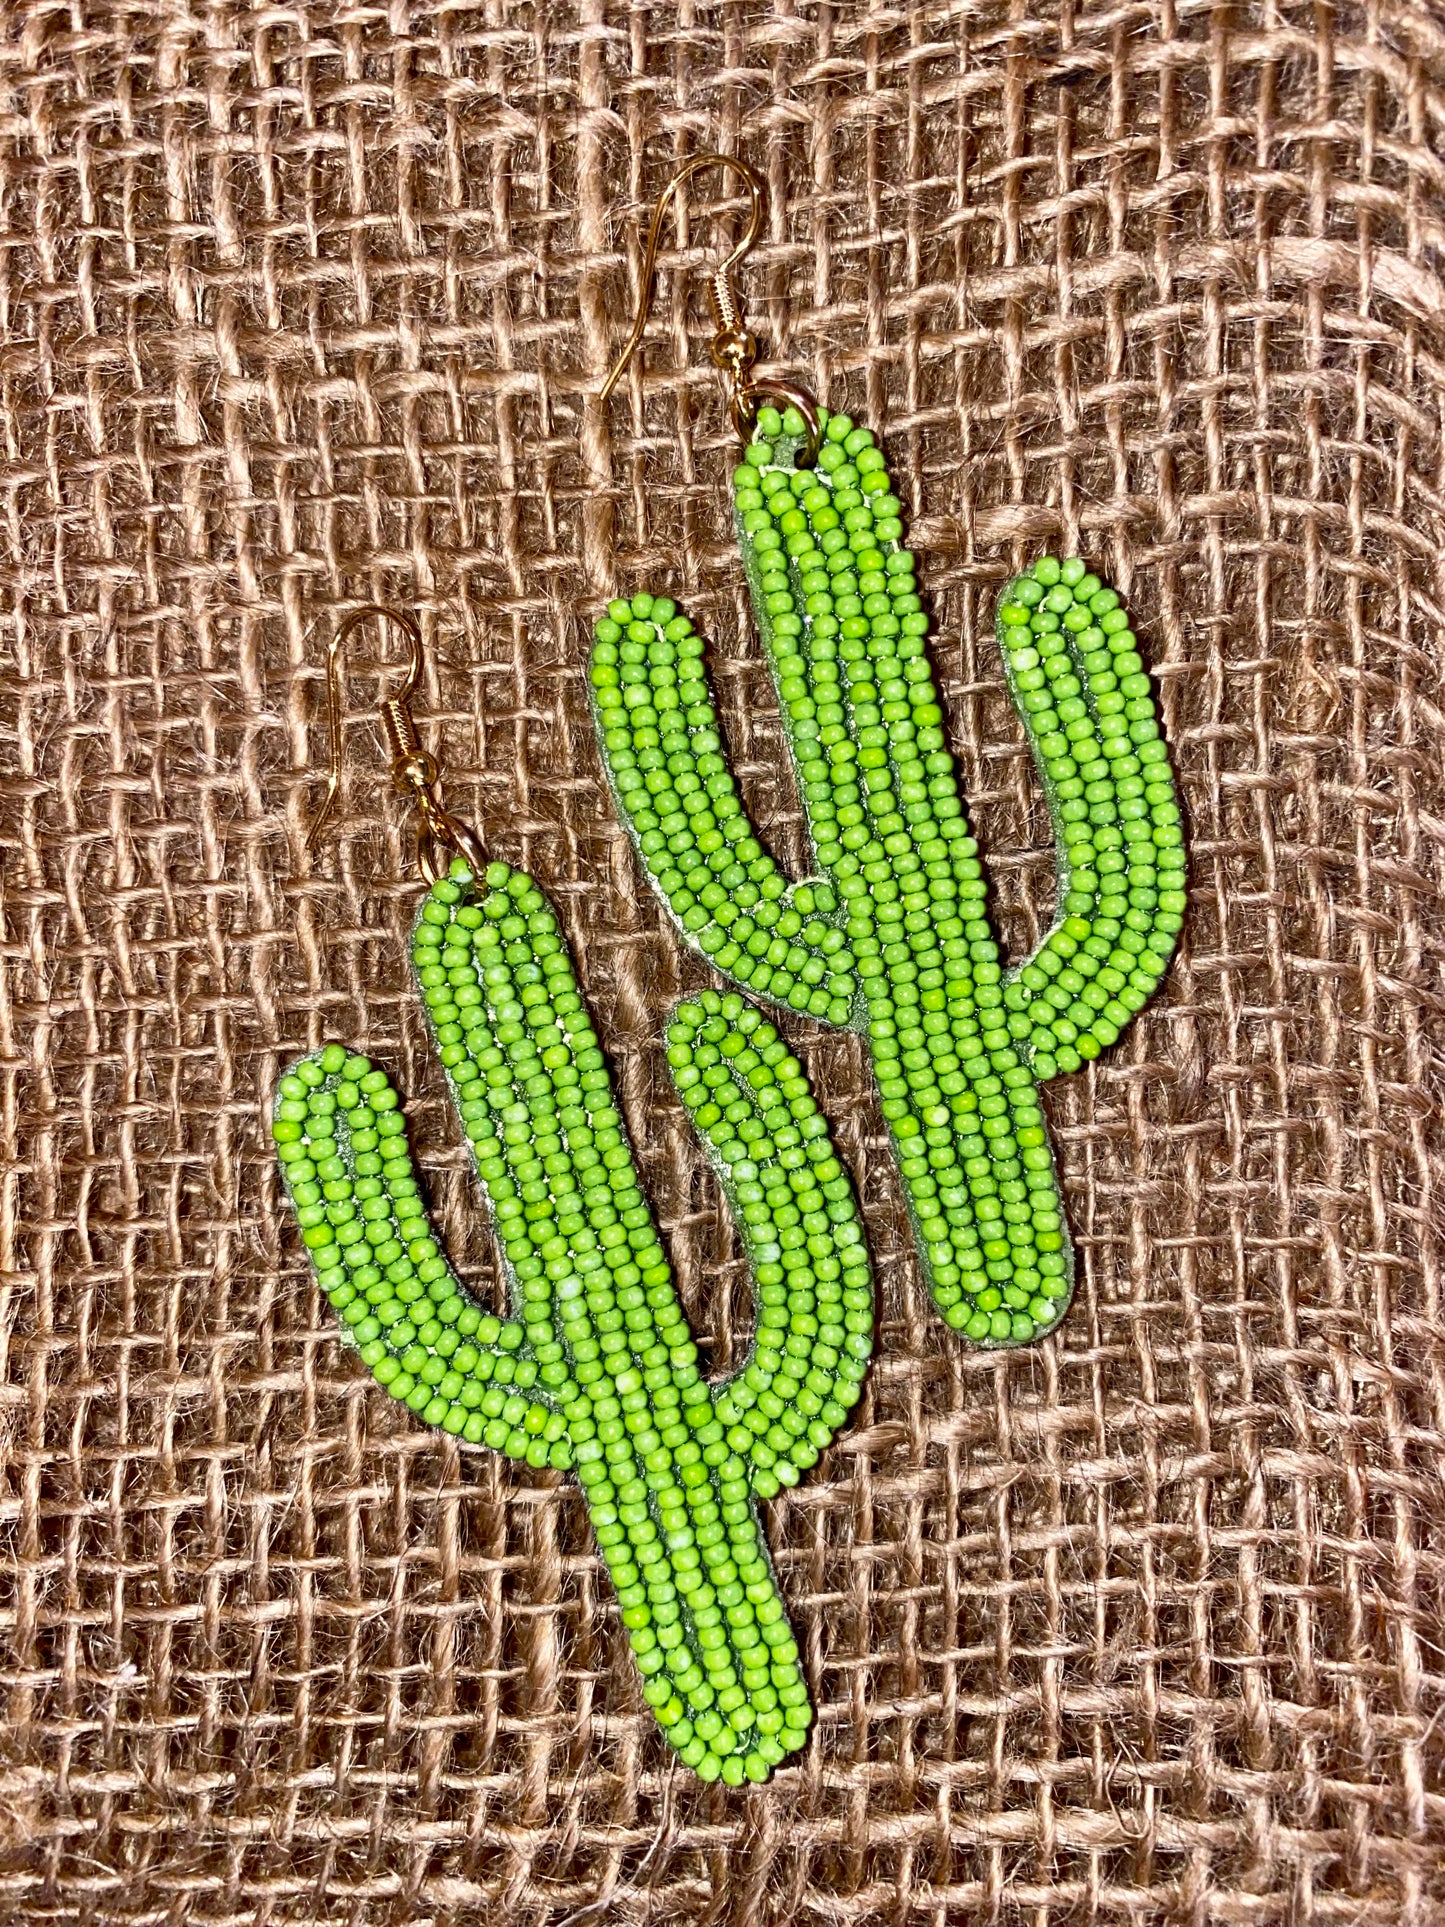 Beaded Cactus - CountryFide Custom Accessories and Outdoors